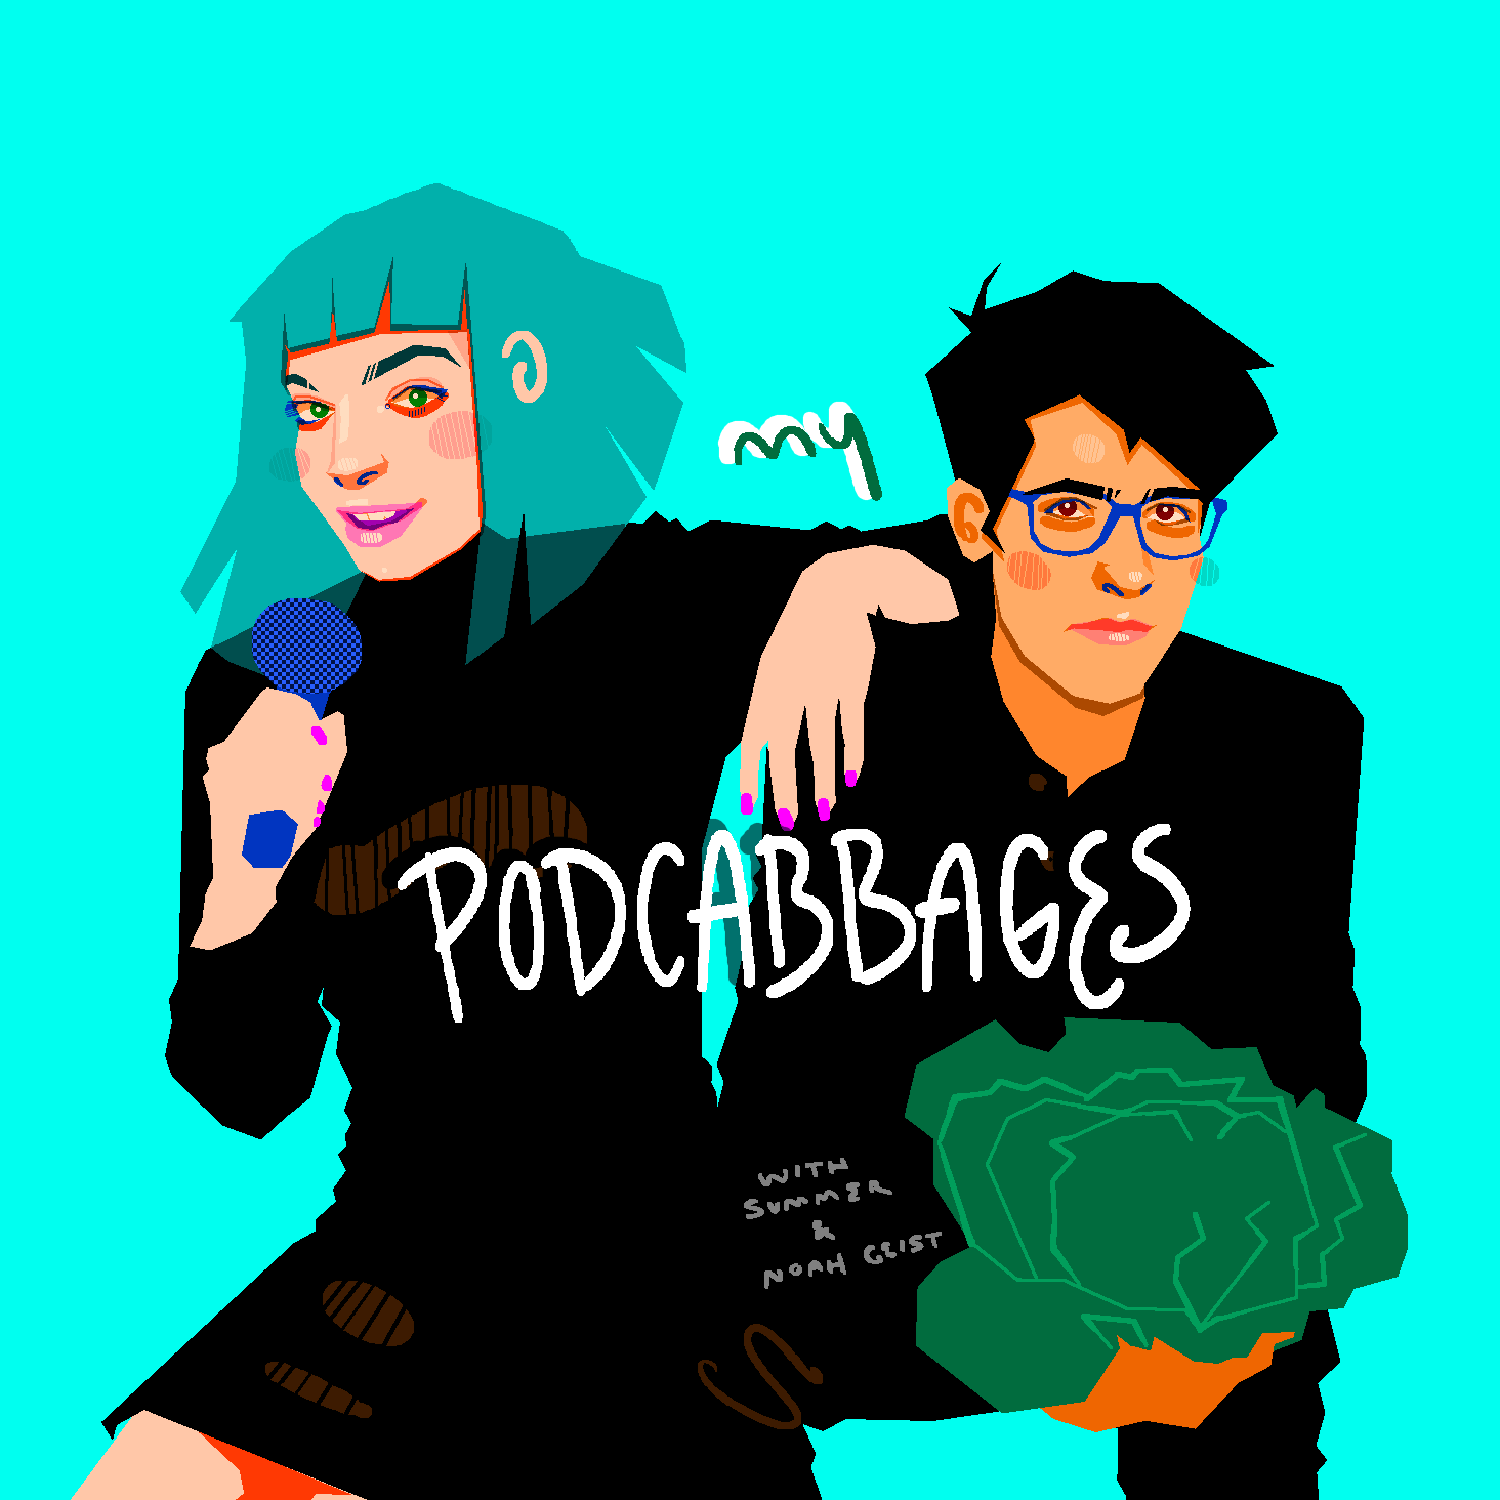 My Podcabbages